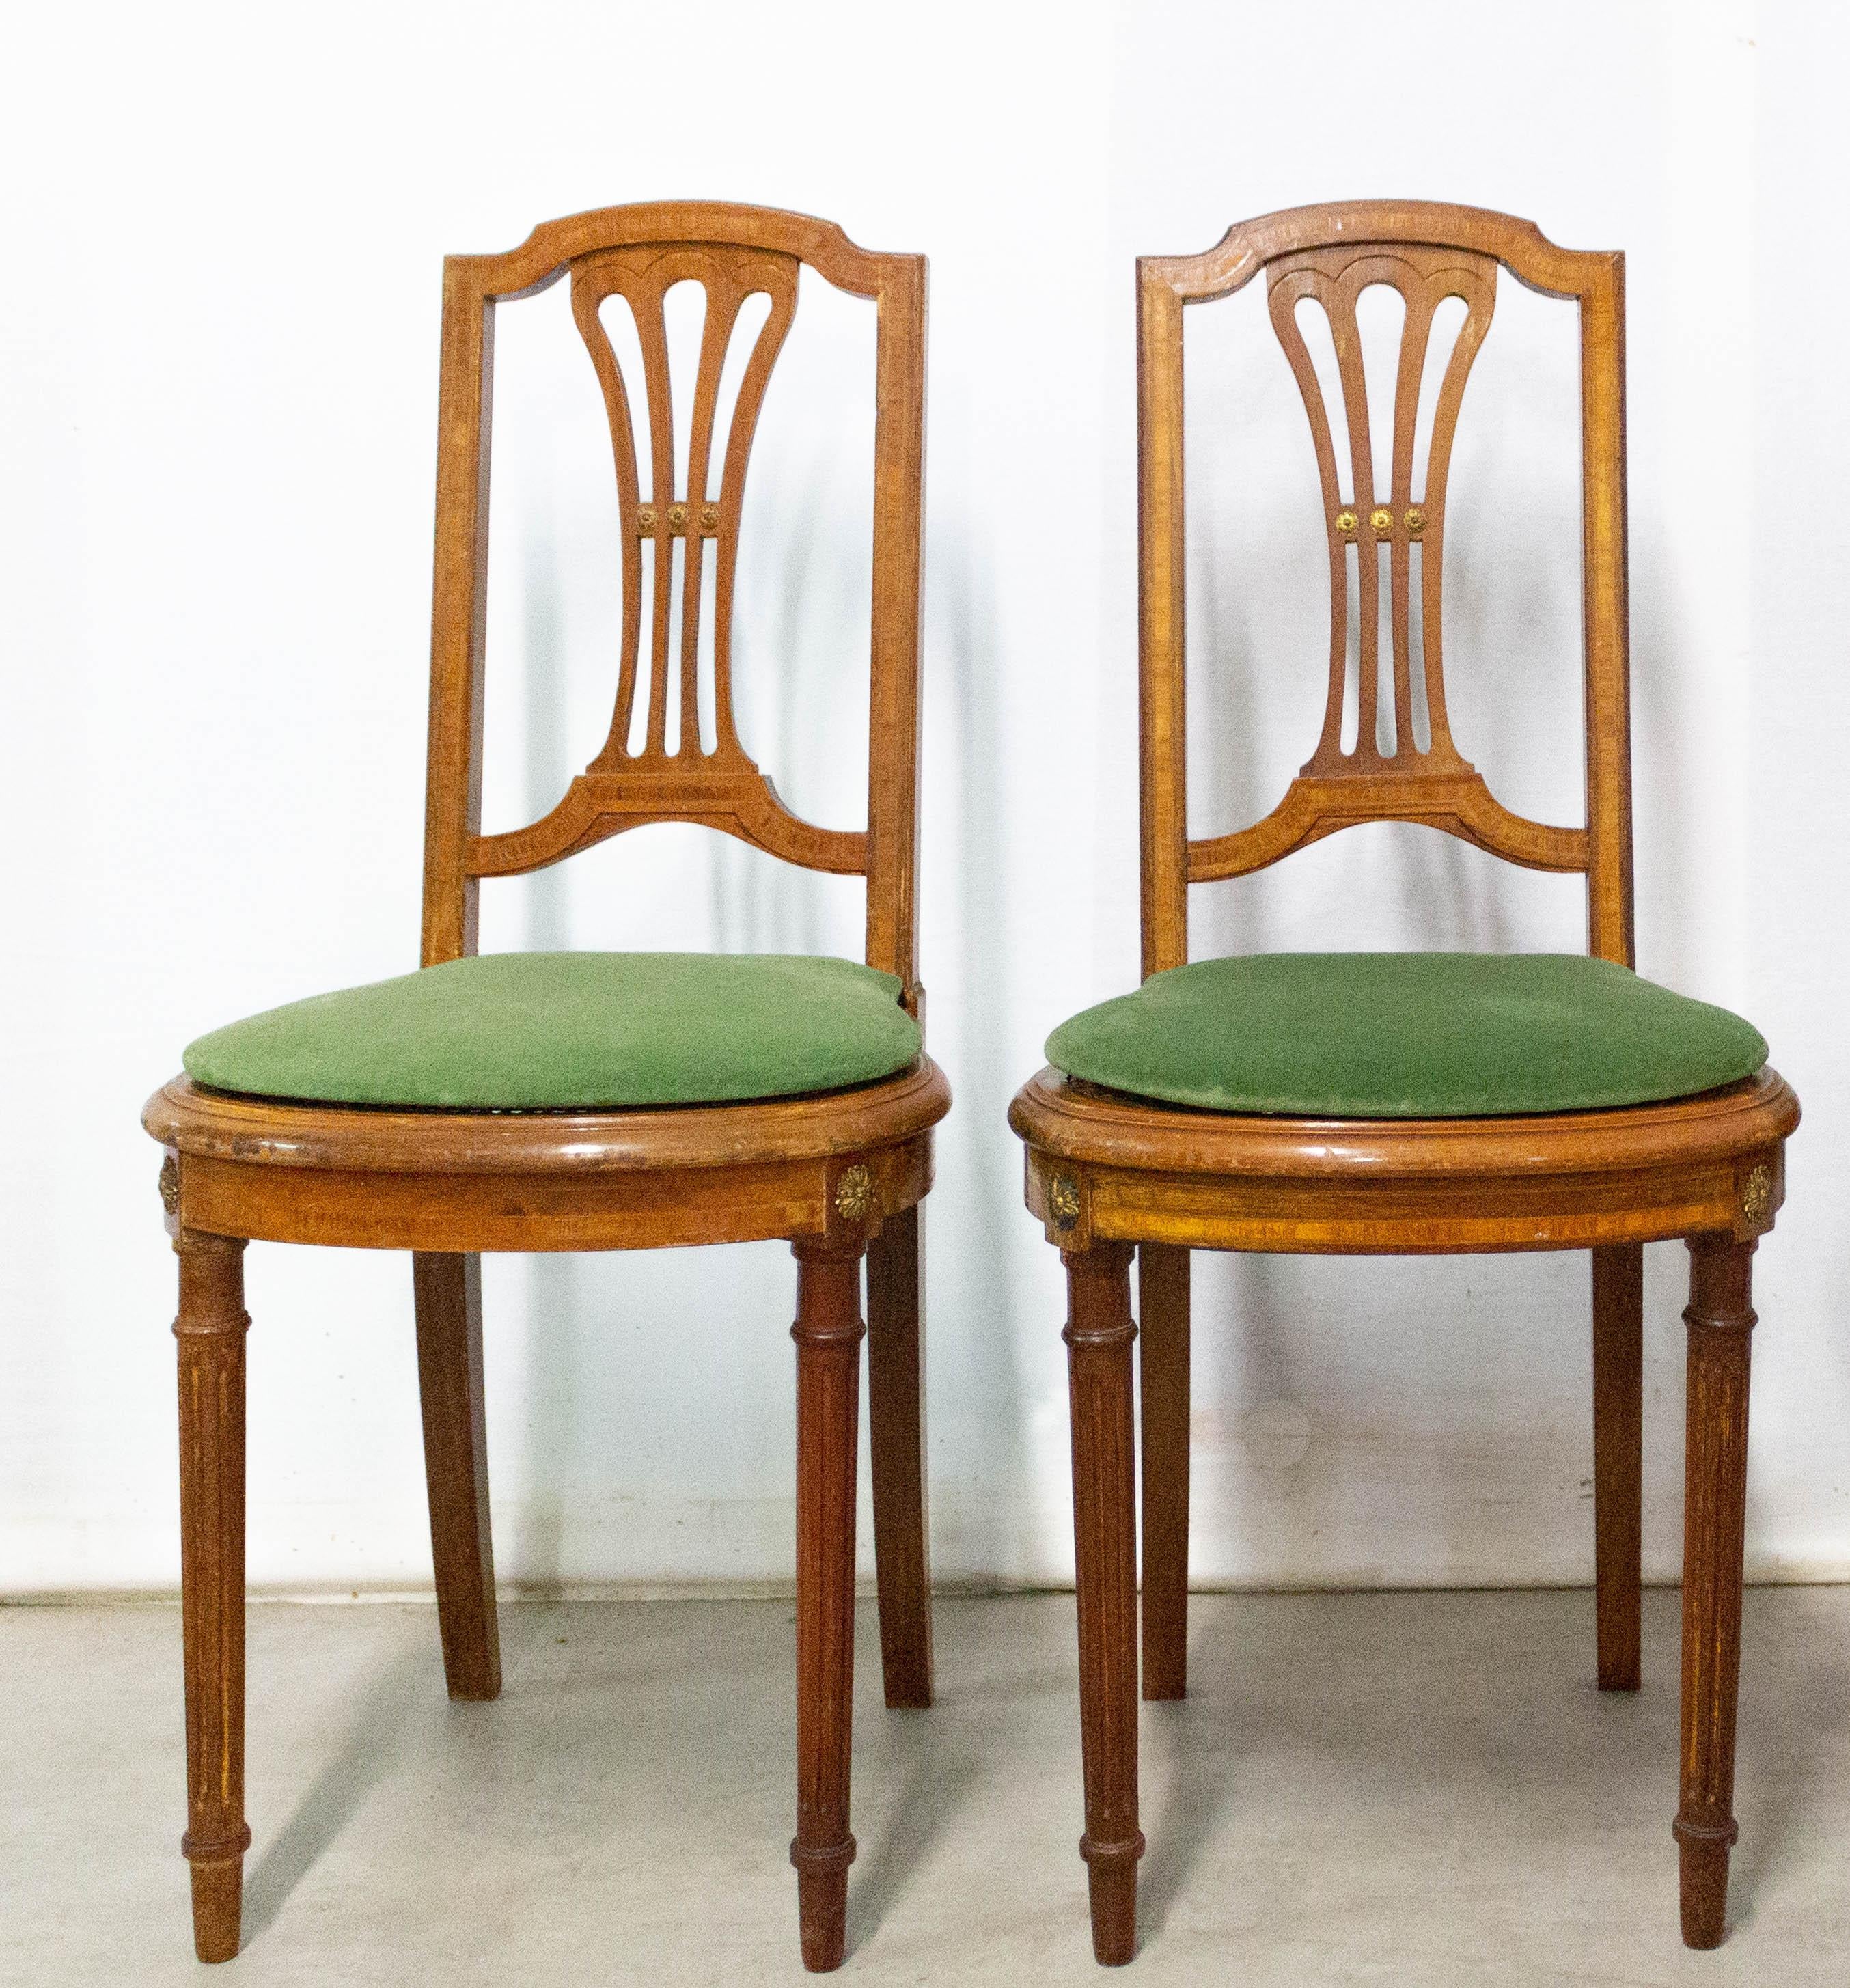 Set of three French dining chairs late 19th century
The chairs are caned and in exotic wood.
If you wish, we have a third chair which can be sold with the pair.
The 